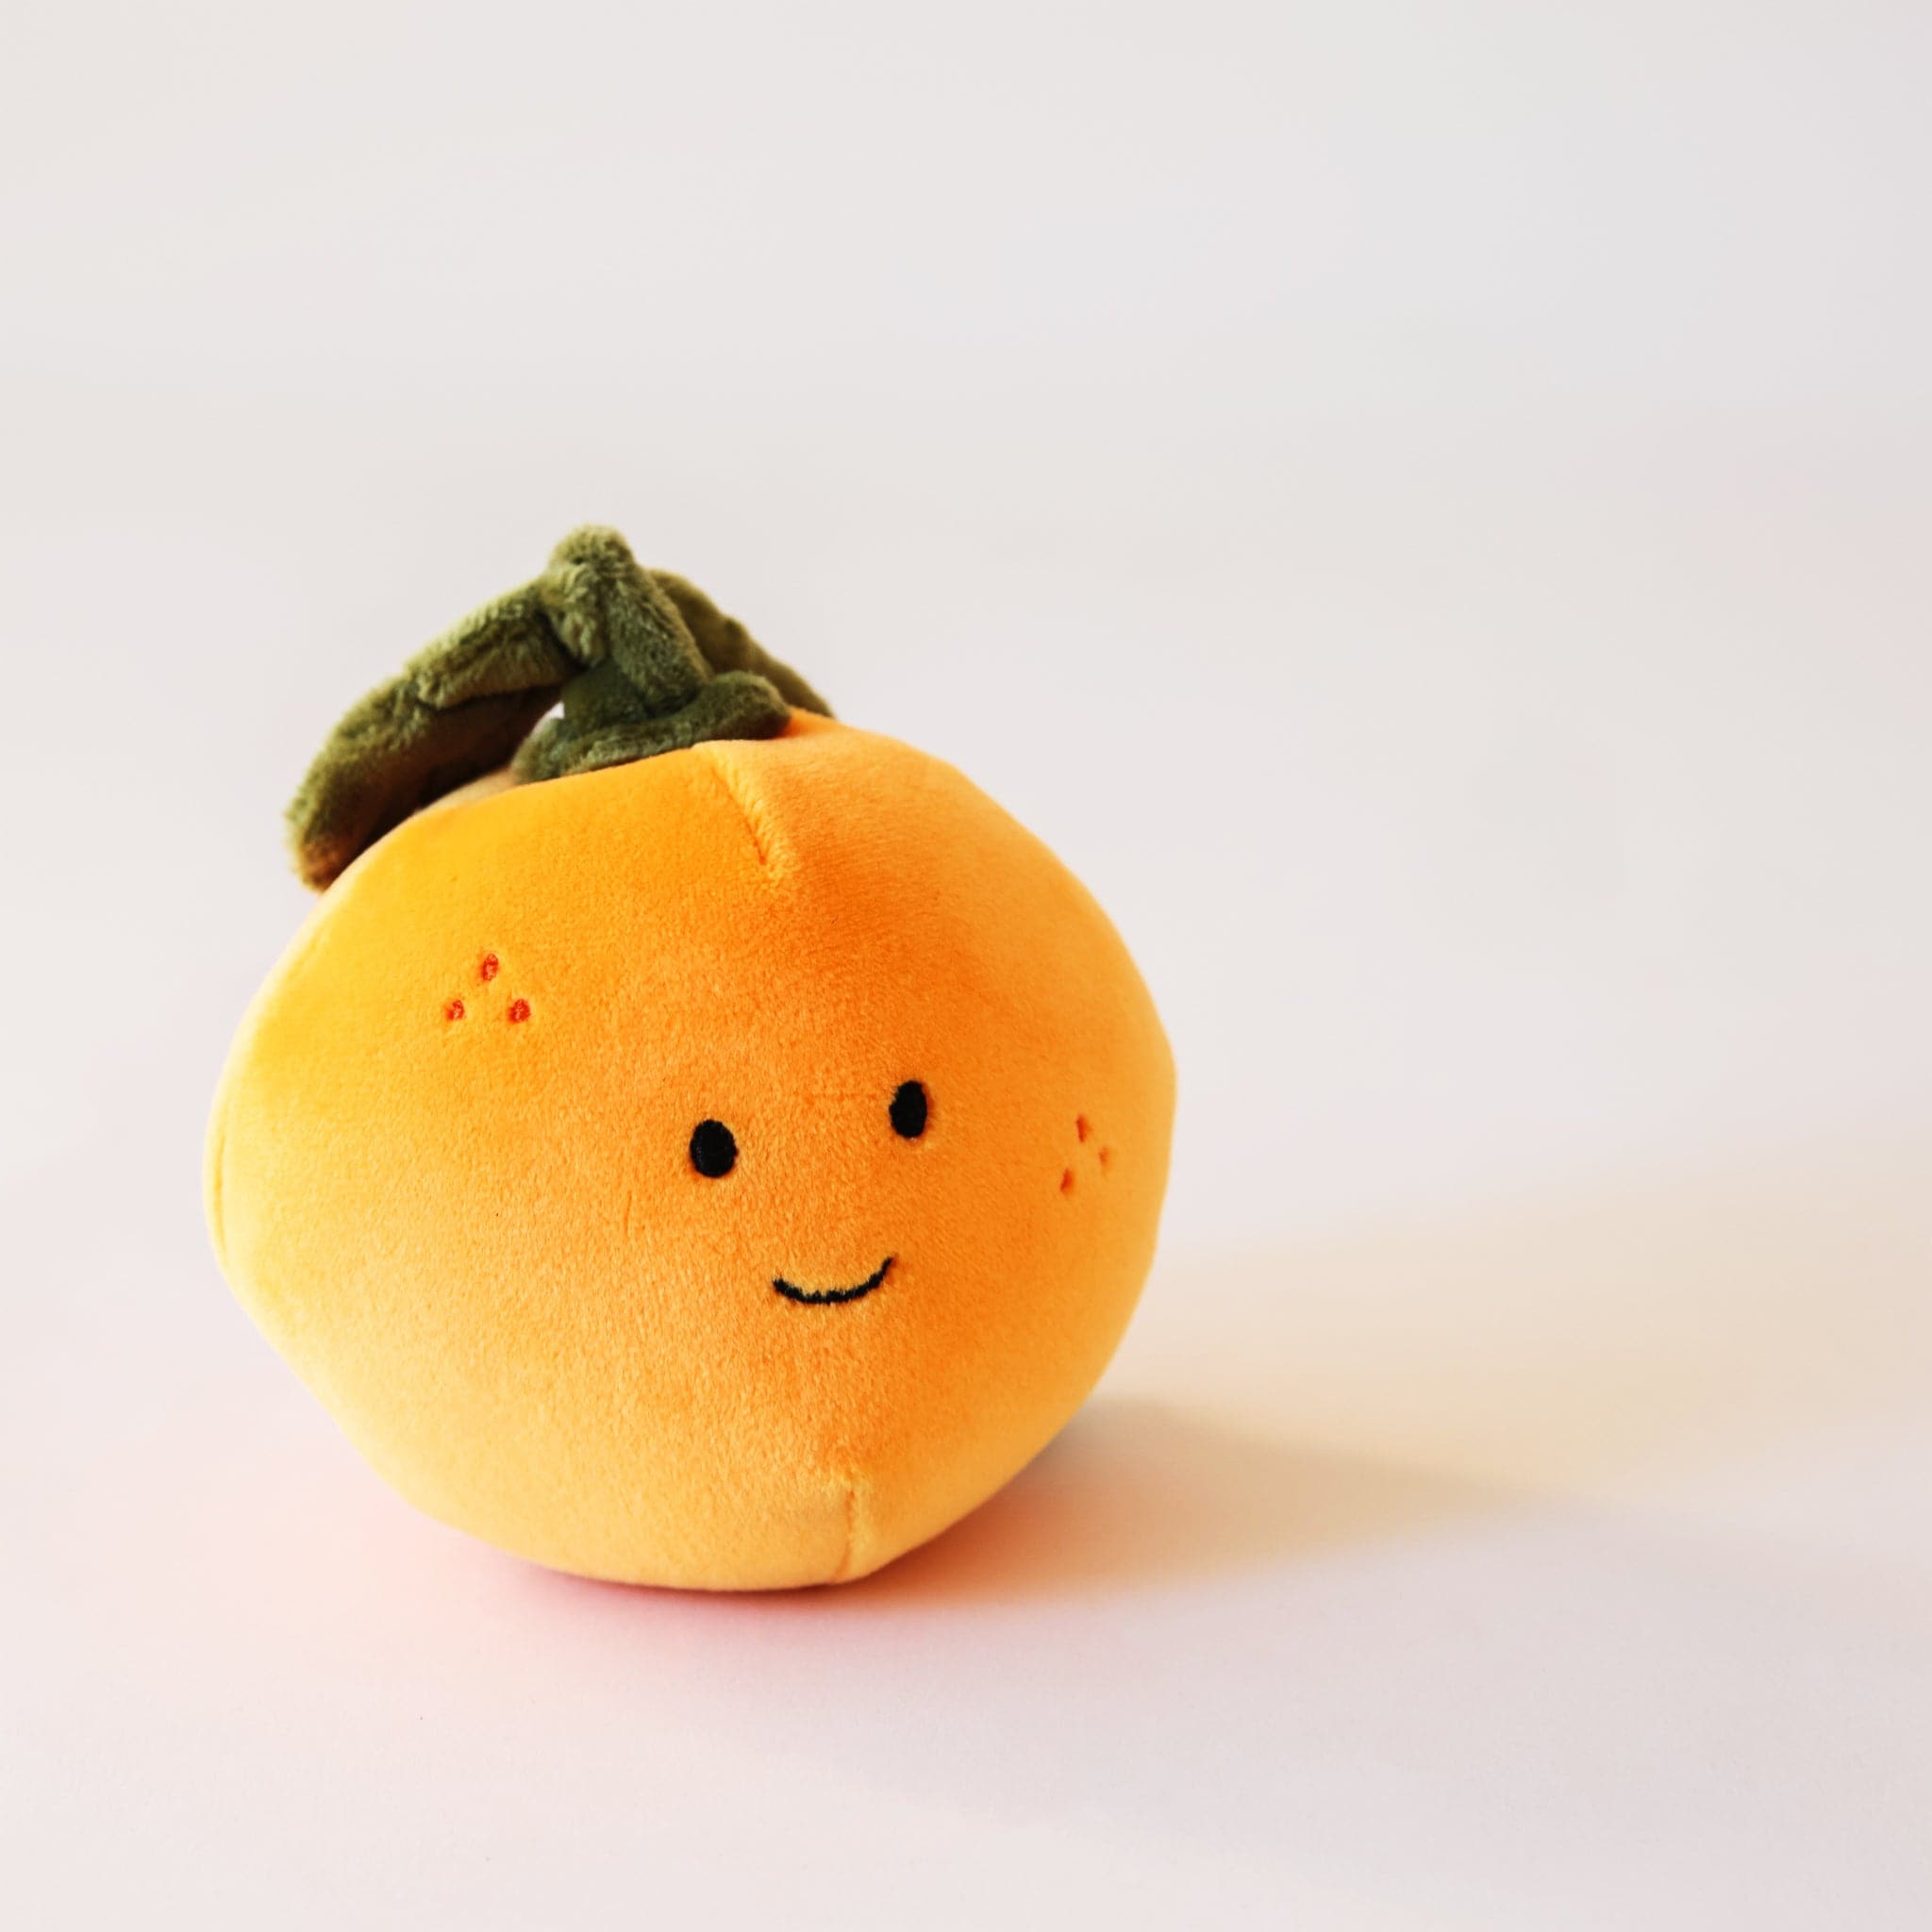 Adorable, plush oranges with sweet smiles and speckled cheeks. With floppy green leaves, these oranges are the absolute cutest. Their fur is soft and their leaves are floppy